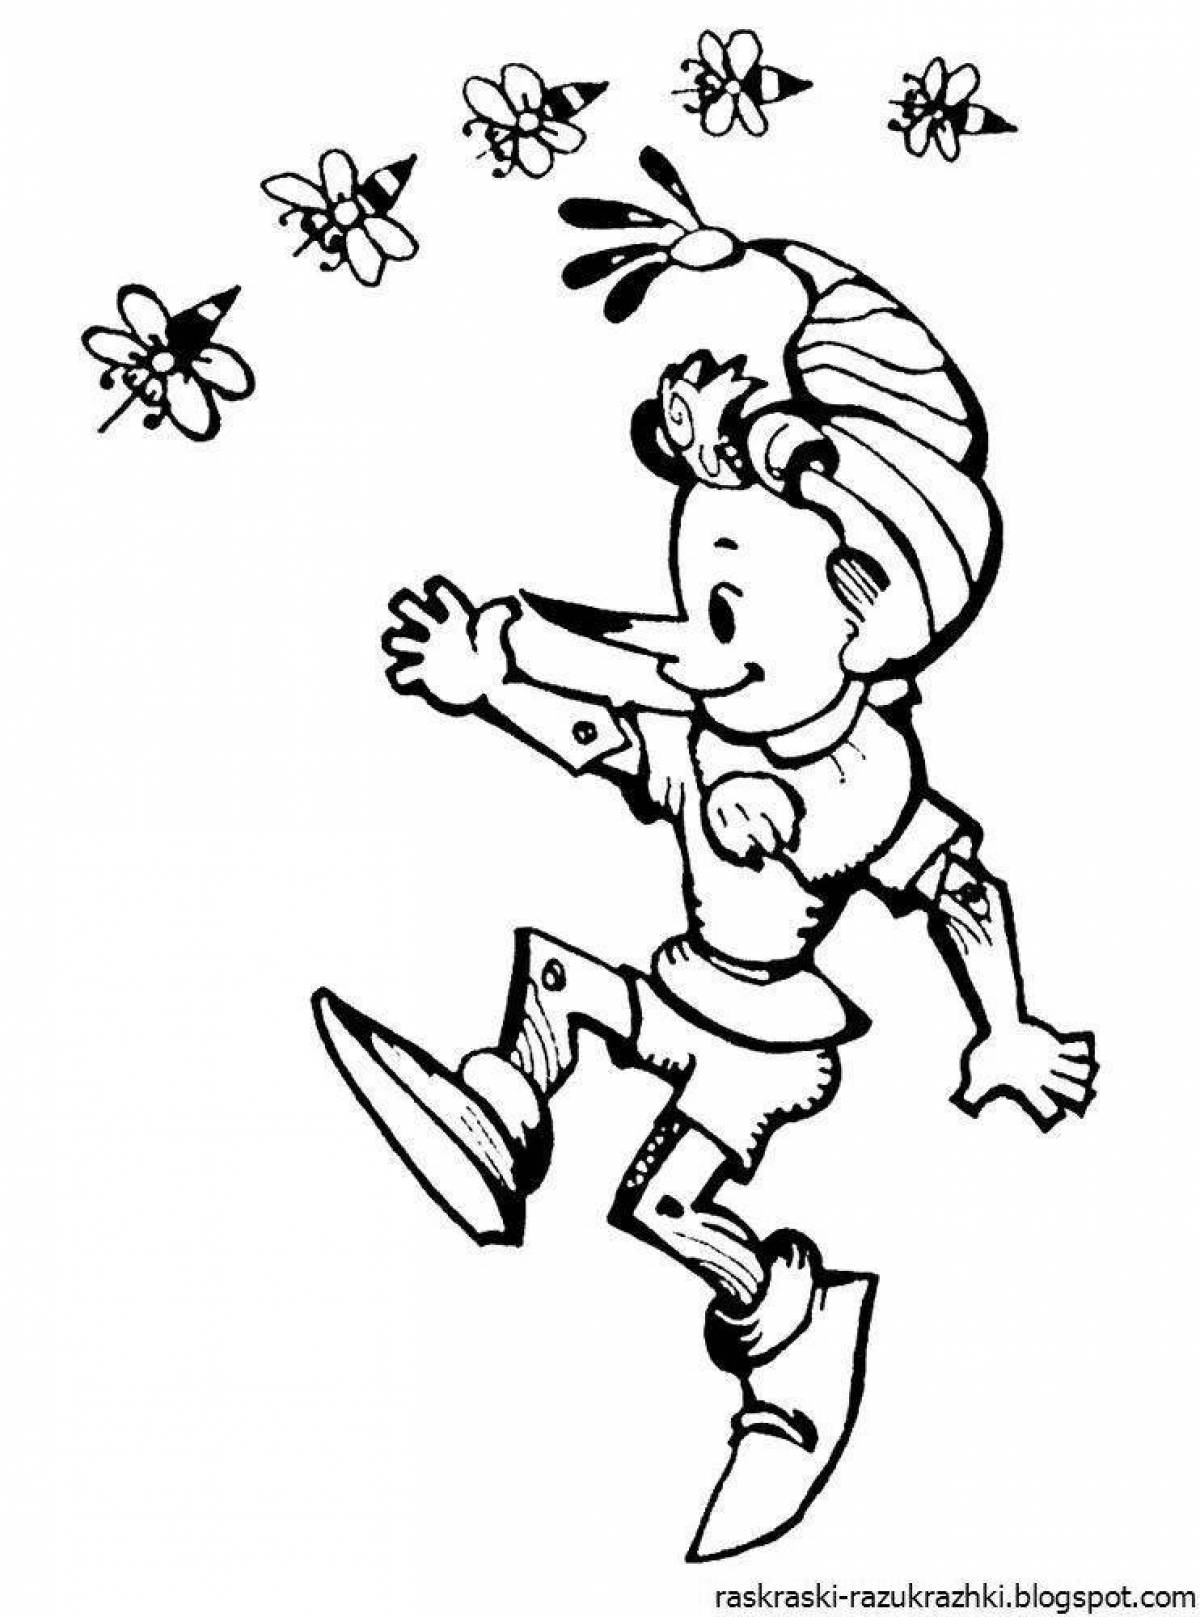 Fantastic fairy tale character coloring pages